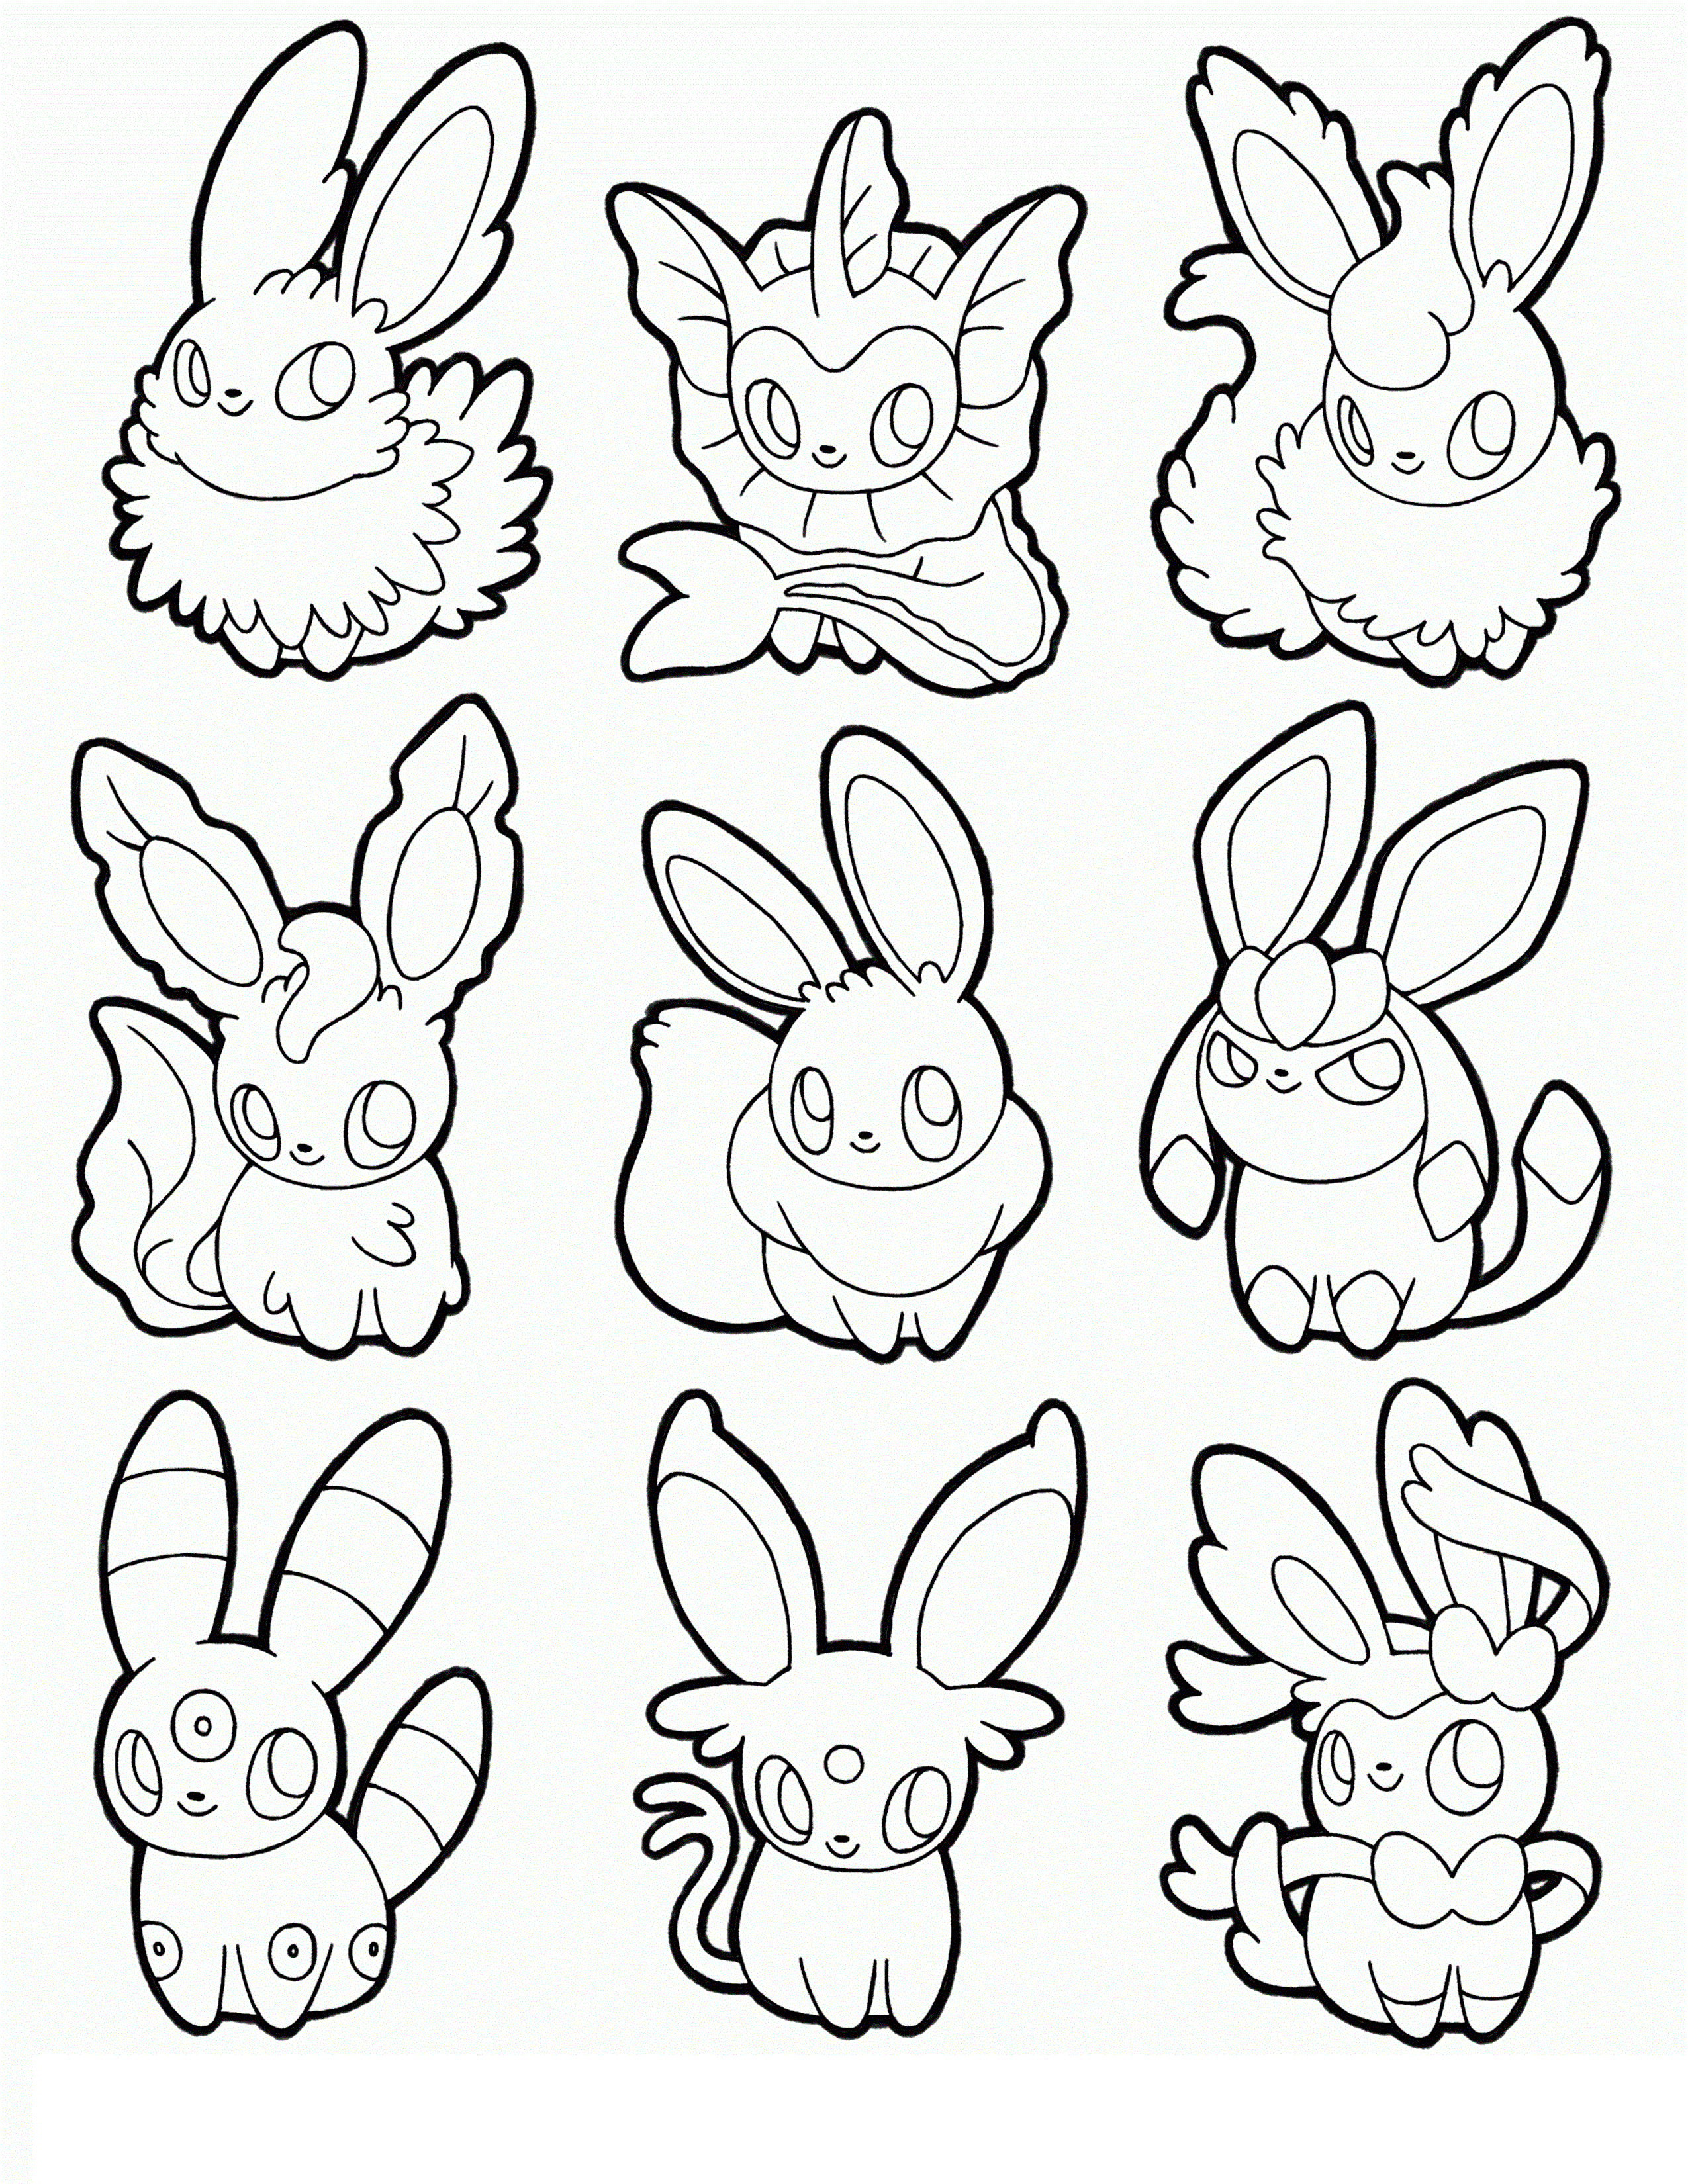 Eeveelutions Coloring Pages Free | Pokemon coloring pages, Pokemon coloring  sheets, Free coloring pages